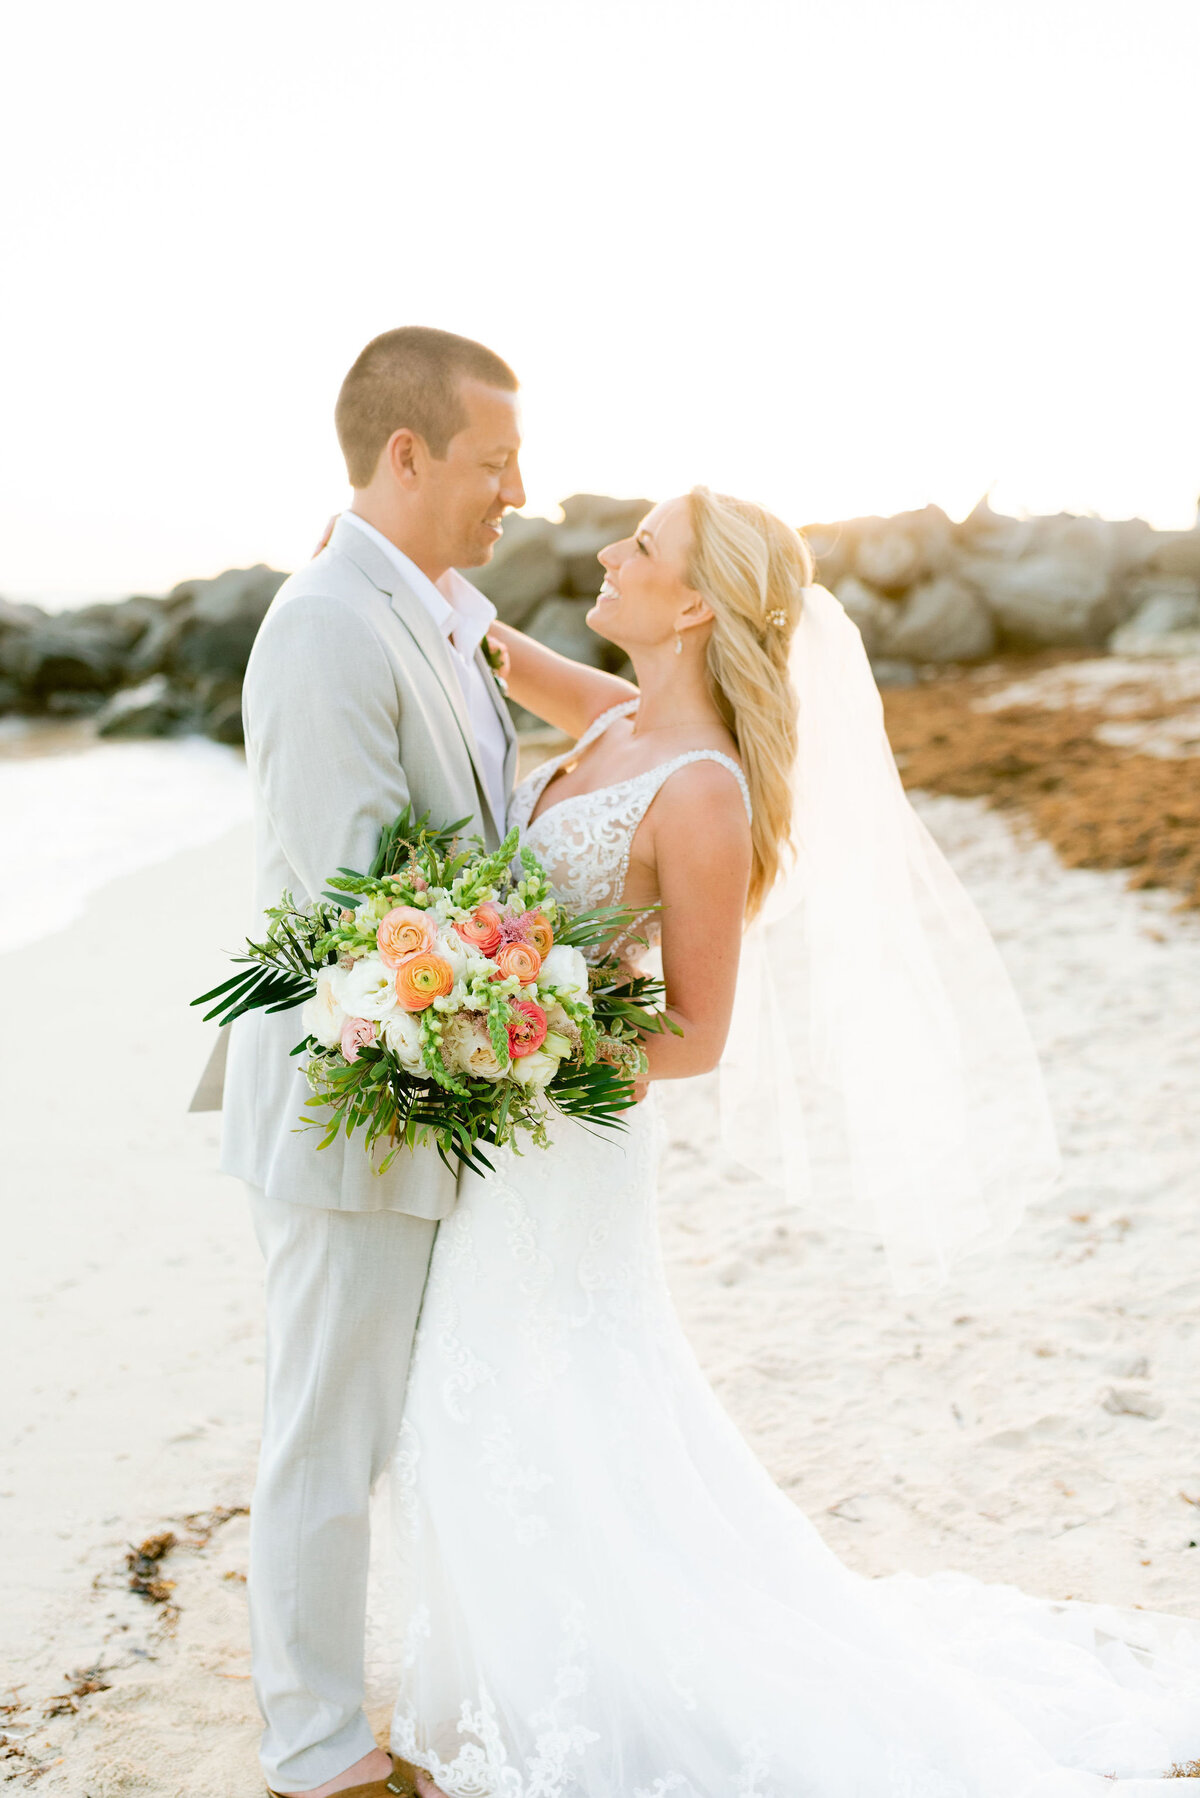 Key West Weddings_Soiree Events_Lavryk Photography15